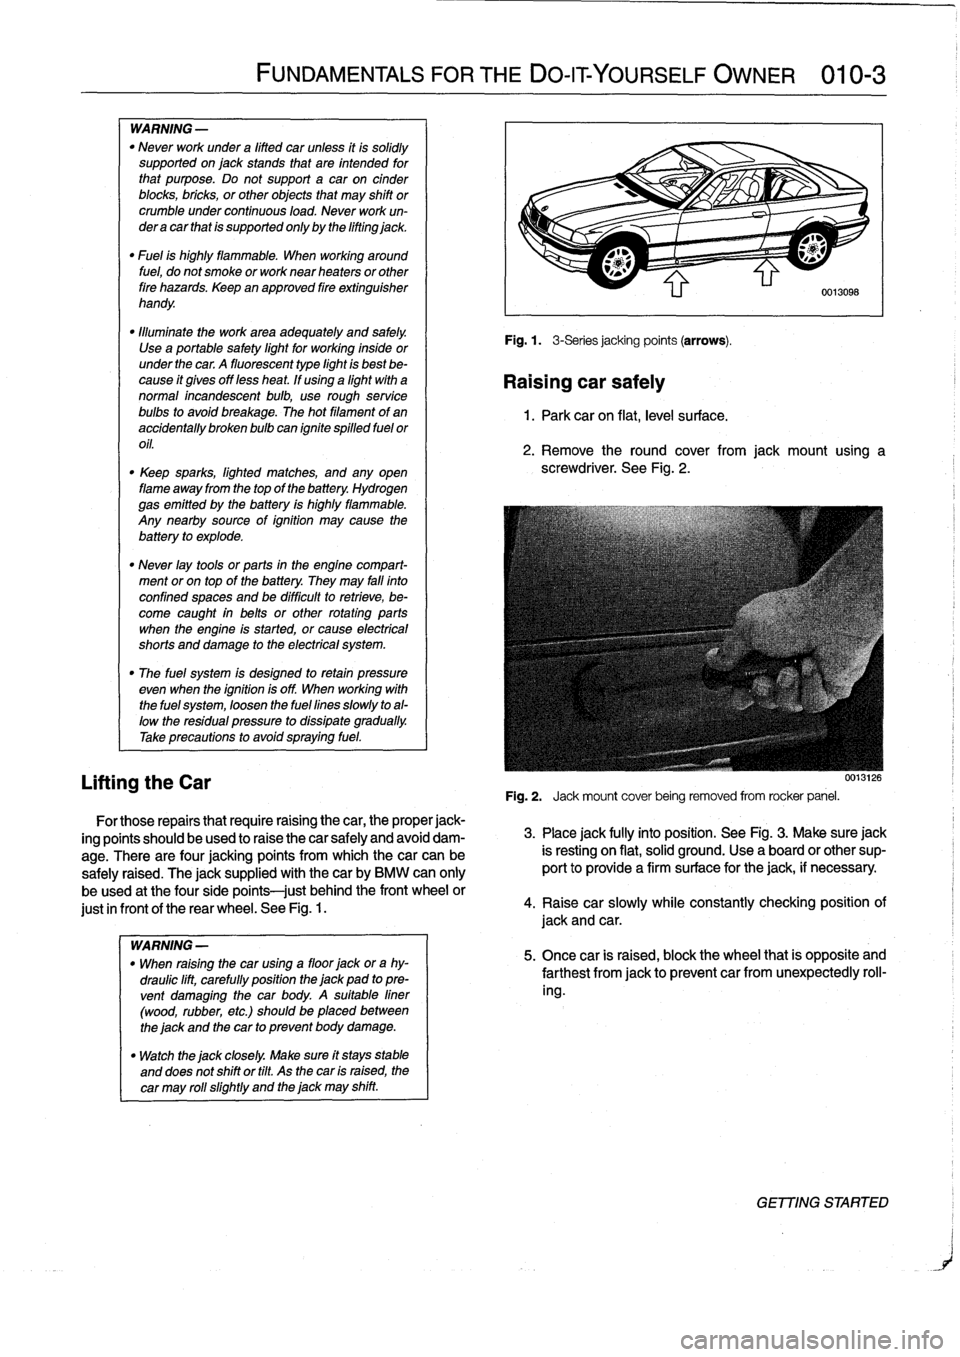 BMW 323i 1995 E36 Workshop Manual 
WARNING
-

"
Never
work
under
a
lifted
car
unless
it
is
solidly
supported
on
jack
stands
that
are
intended
for
that
purpose
.
Do
not
support
a
car
on
cinder
blocks,
bricks,
or
other
objects
that
may
